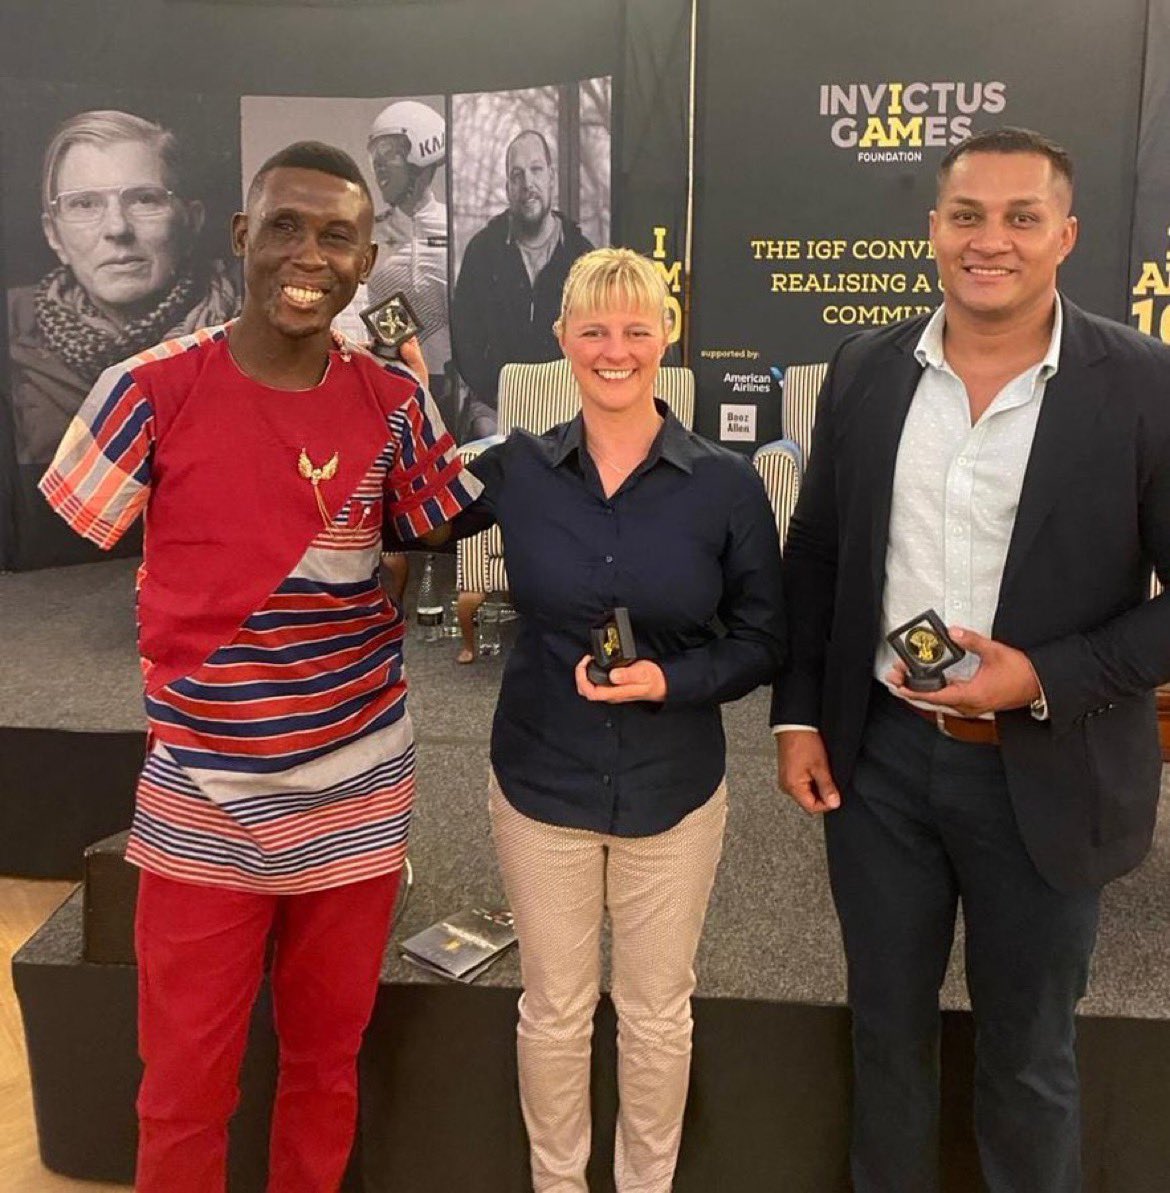 A Colombian disabled veteran Víctor Vera was invited to the conversation held by the Invictus Games Foundation in celebration of the 10th Anniversary in London. 
#IAM10  #InvictusGames 💛🖤